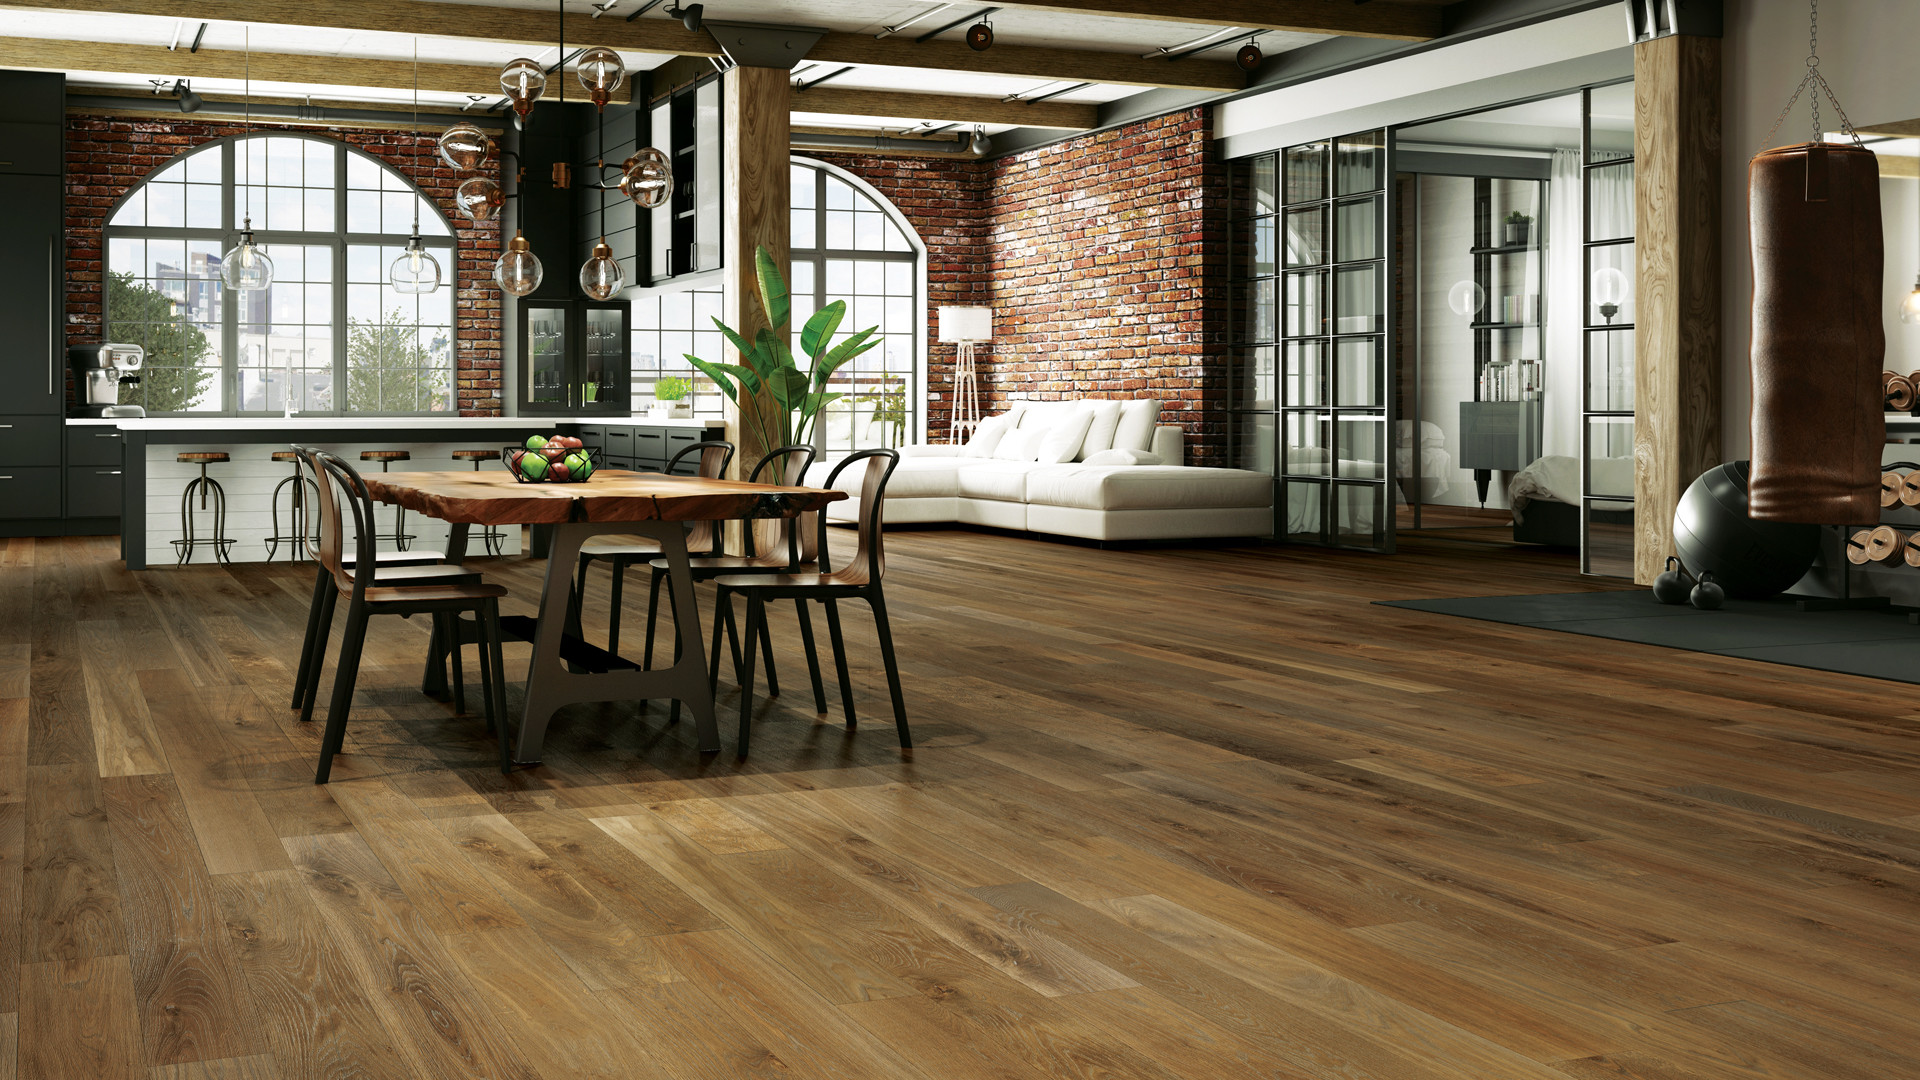 10 Stylish How Much Does It Cost for Hardwood Floors 2024 free download how much does it cost for hardwood floors of 4 latest hardwood flooring trends of 2018 lauzon flooring with regard to combined with a wire brushed texture and an ultra matte sheen these new 